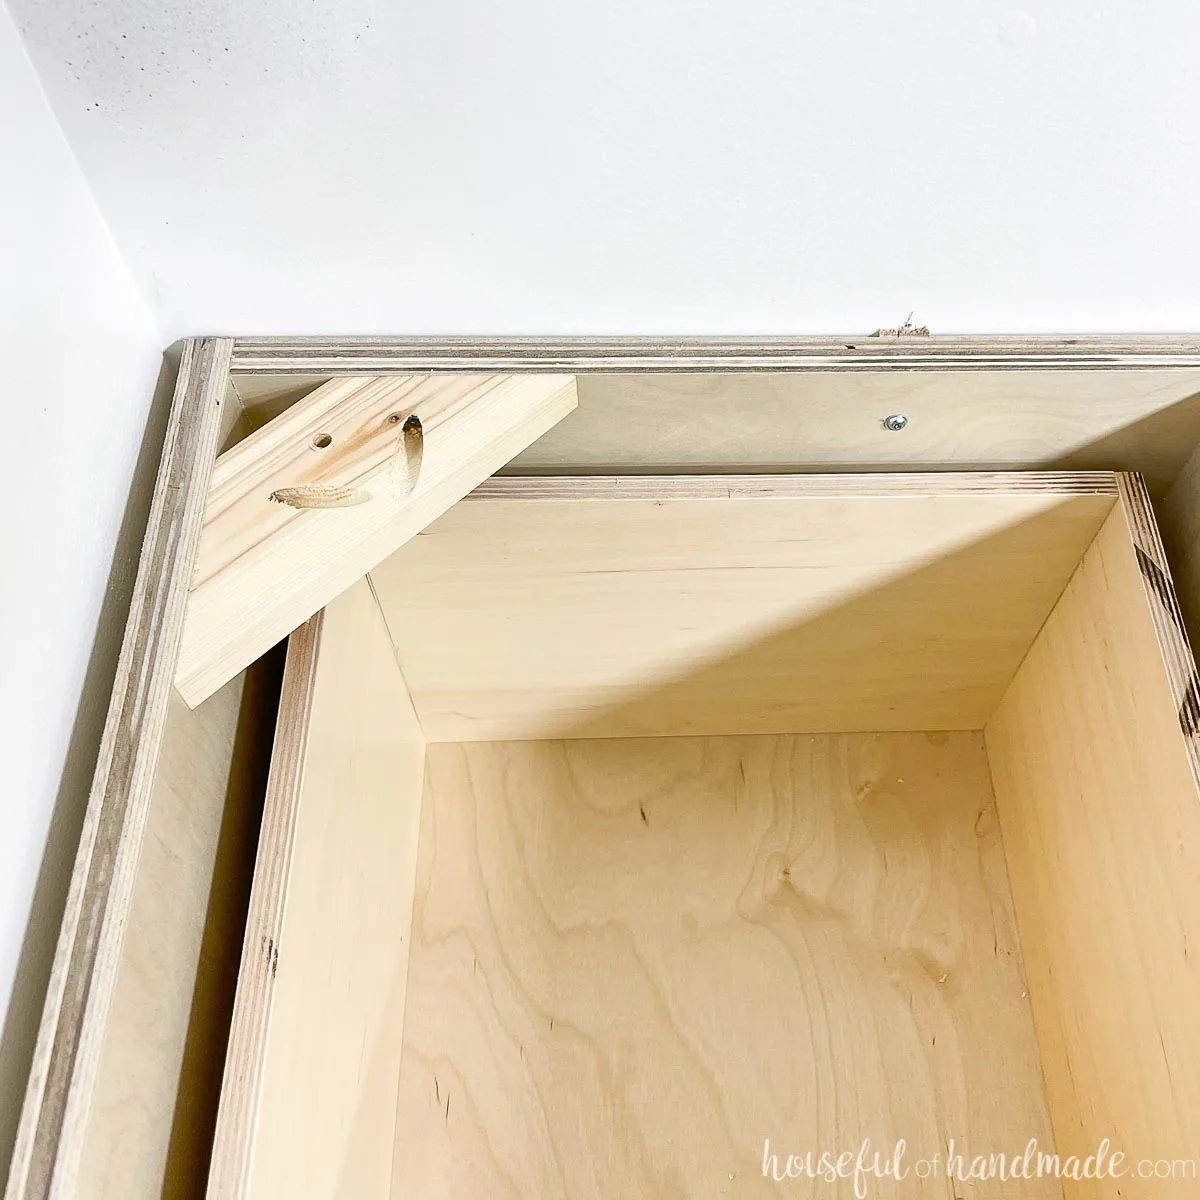 A scrap piece of wood attached to the top corner of the cabinet to attach the countertop to.